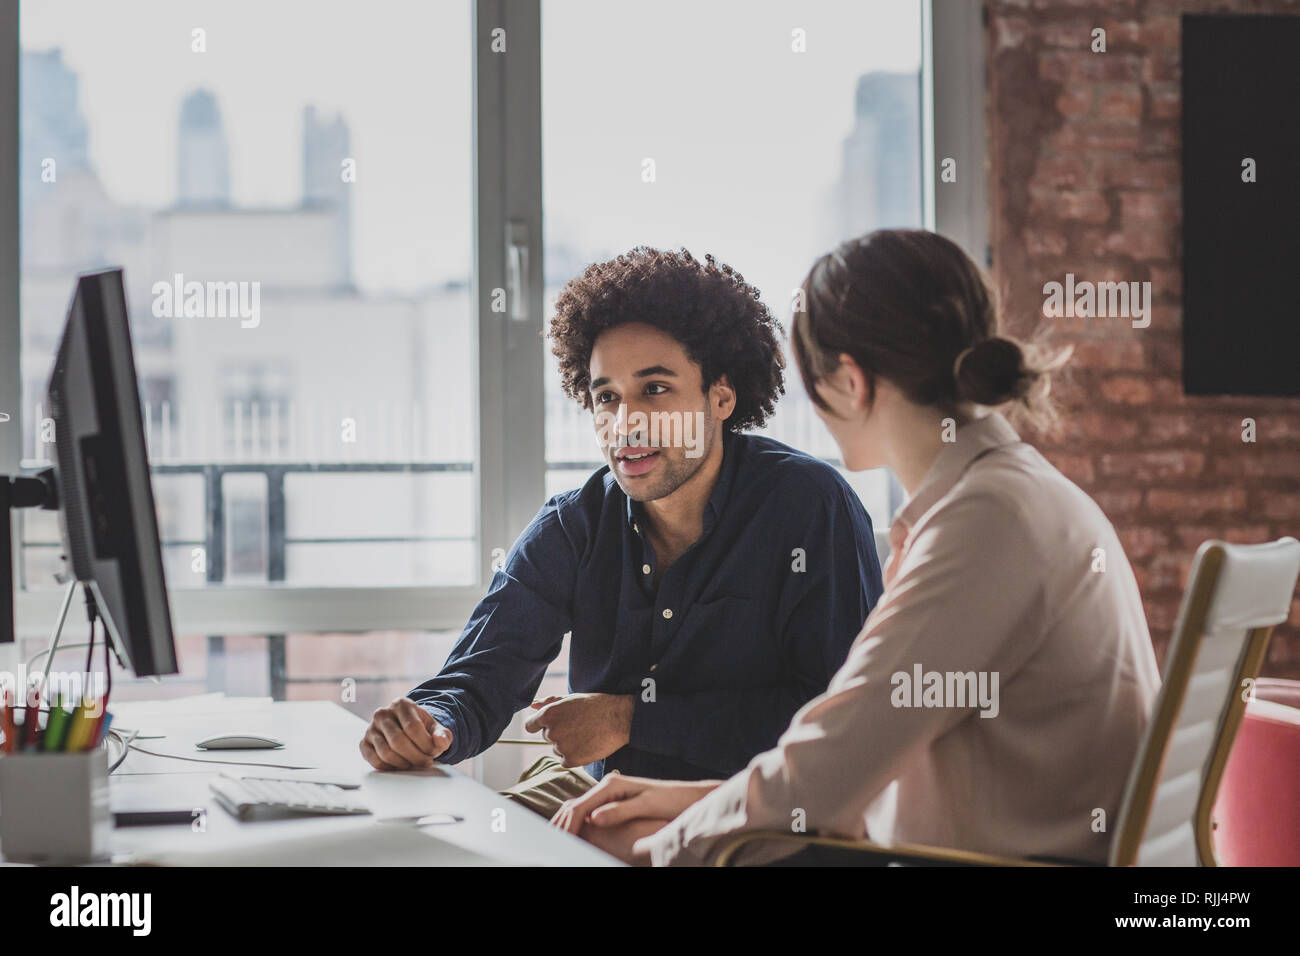 Coworkers working together in an office Stock Photo